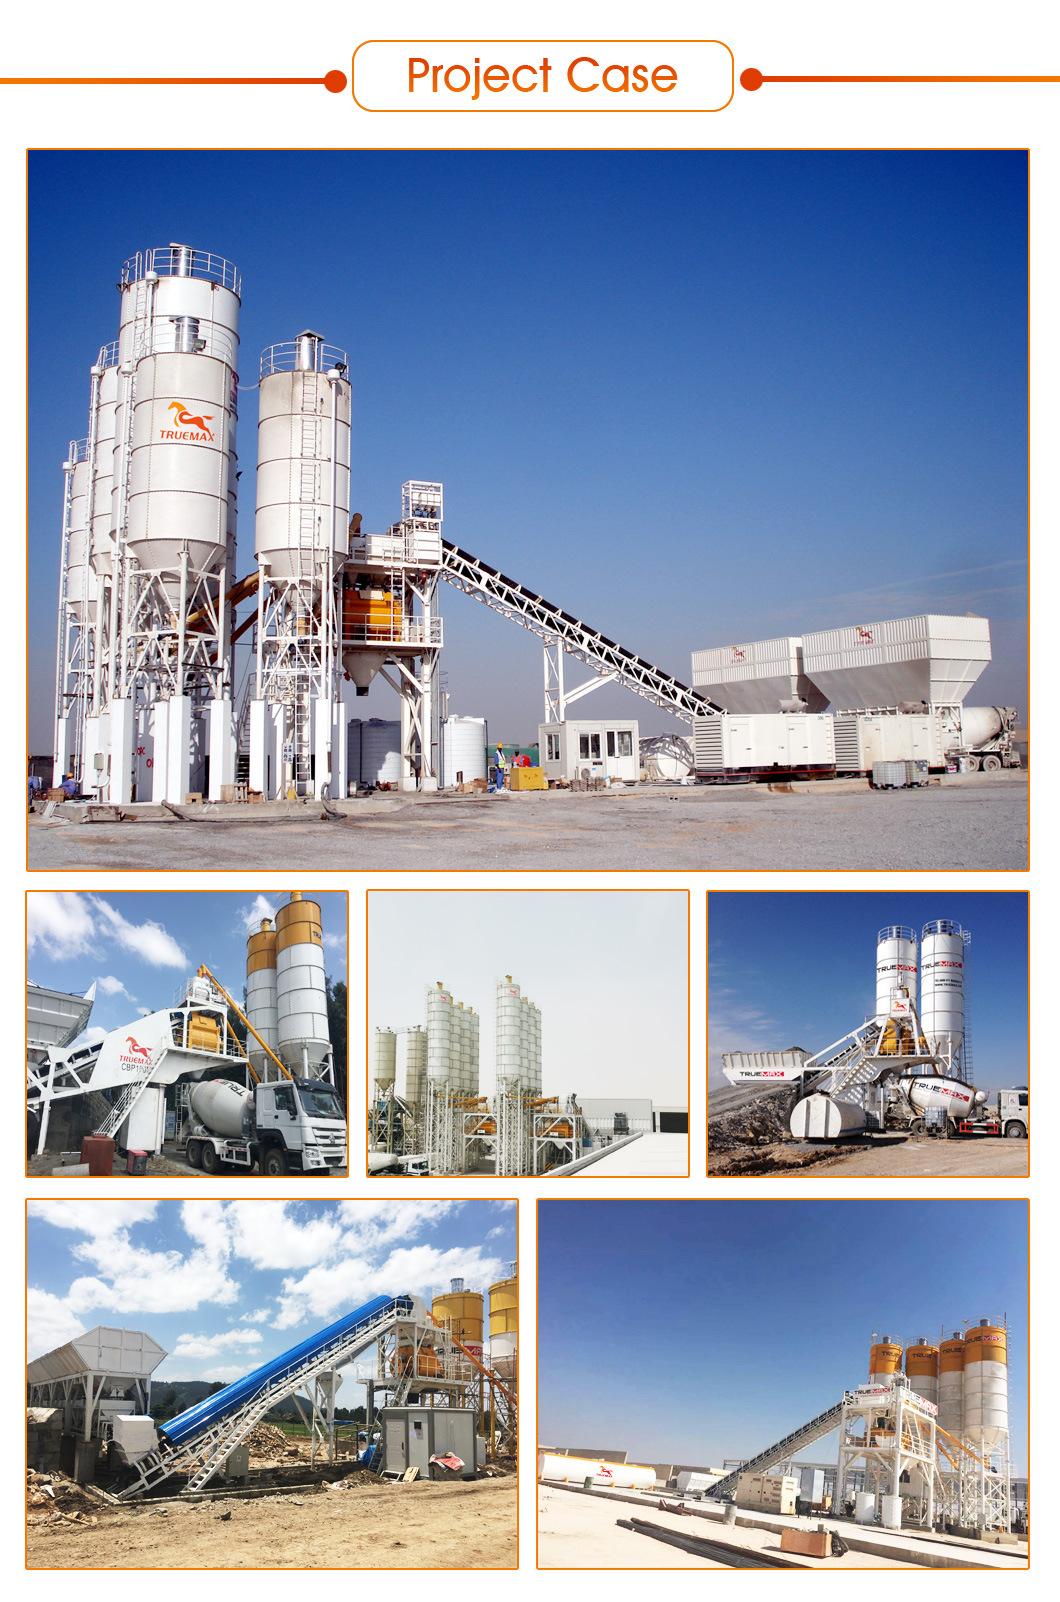 China Concrete Mixer Plant for Export